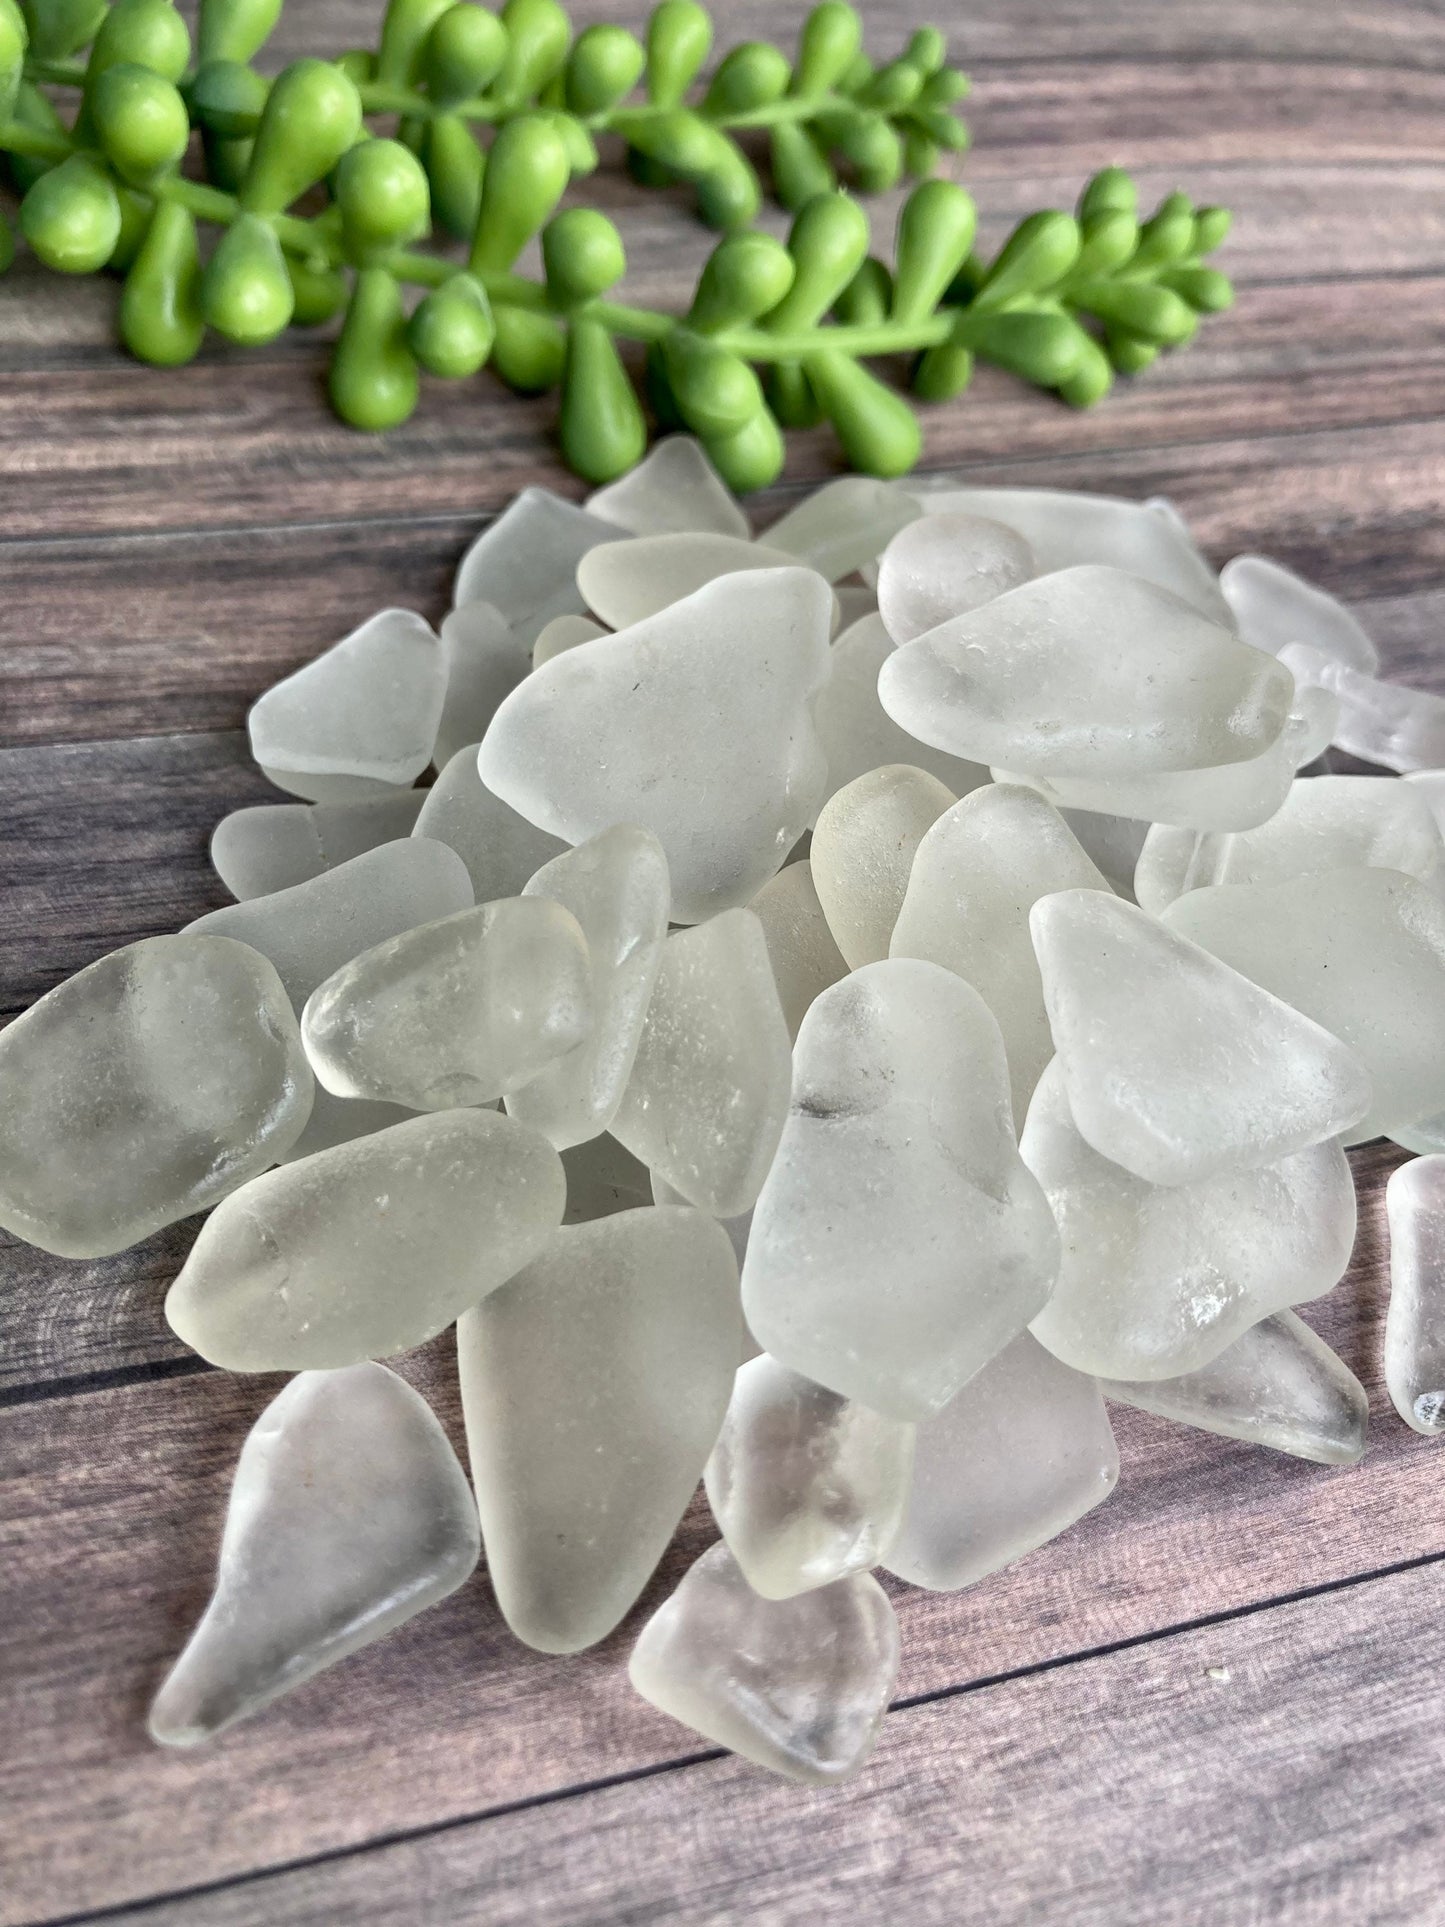 White sea glass 20 pieces/beach glass collected from Queensferry beach Scotland in 2022